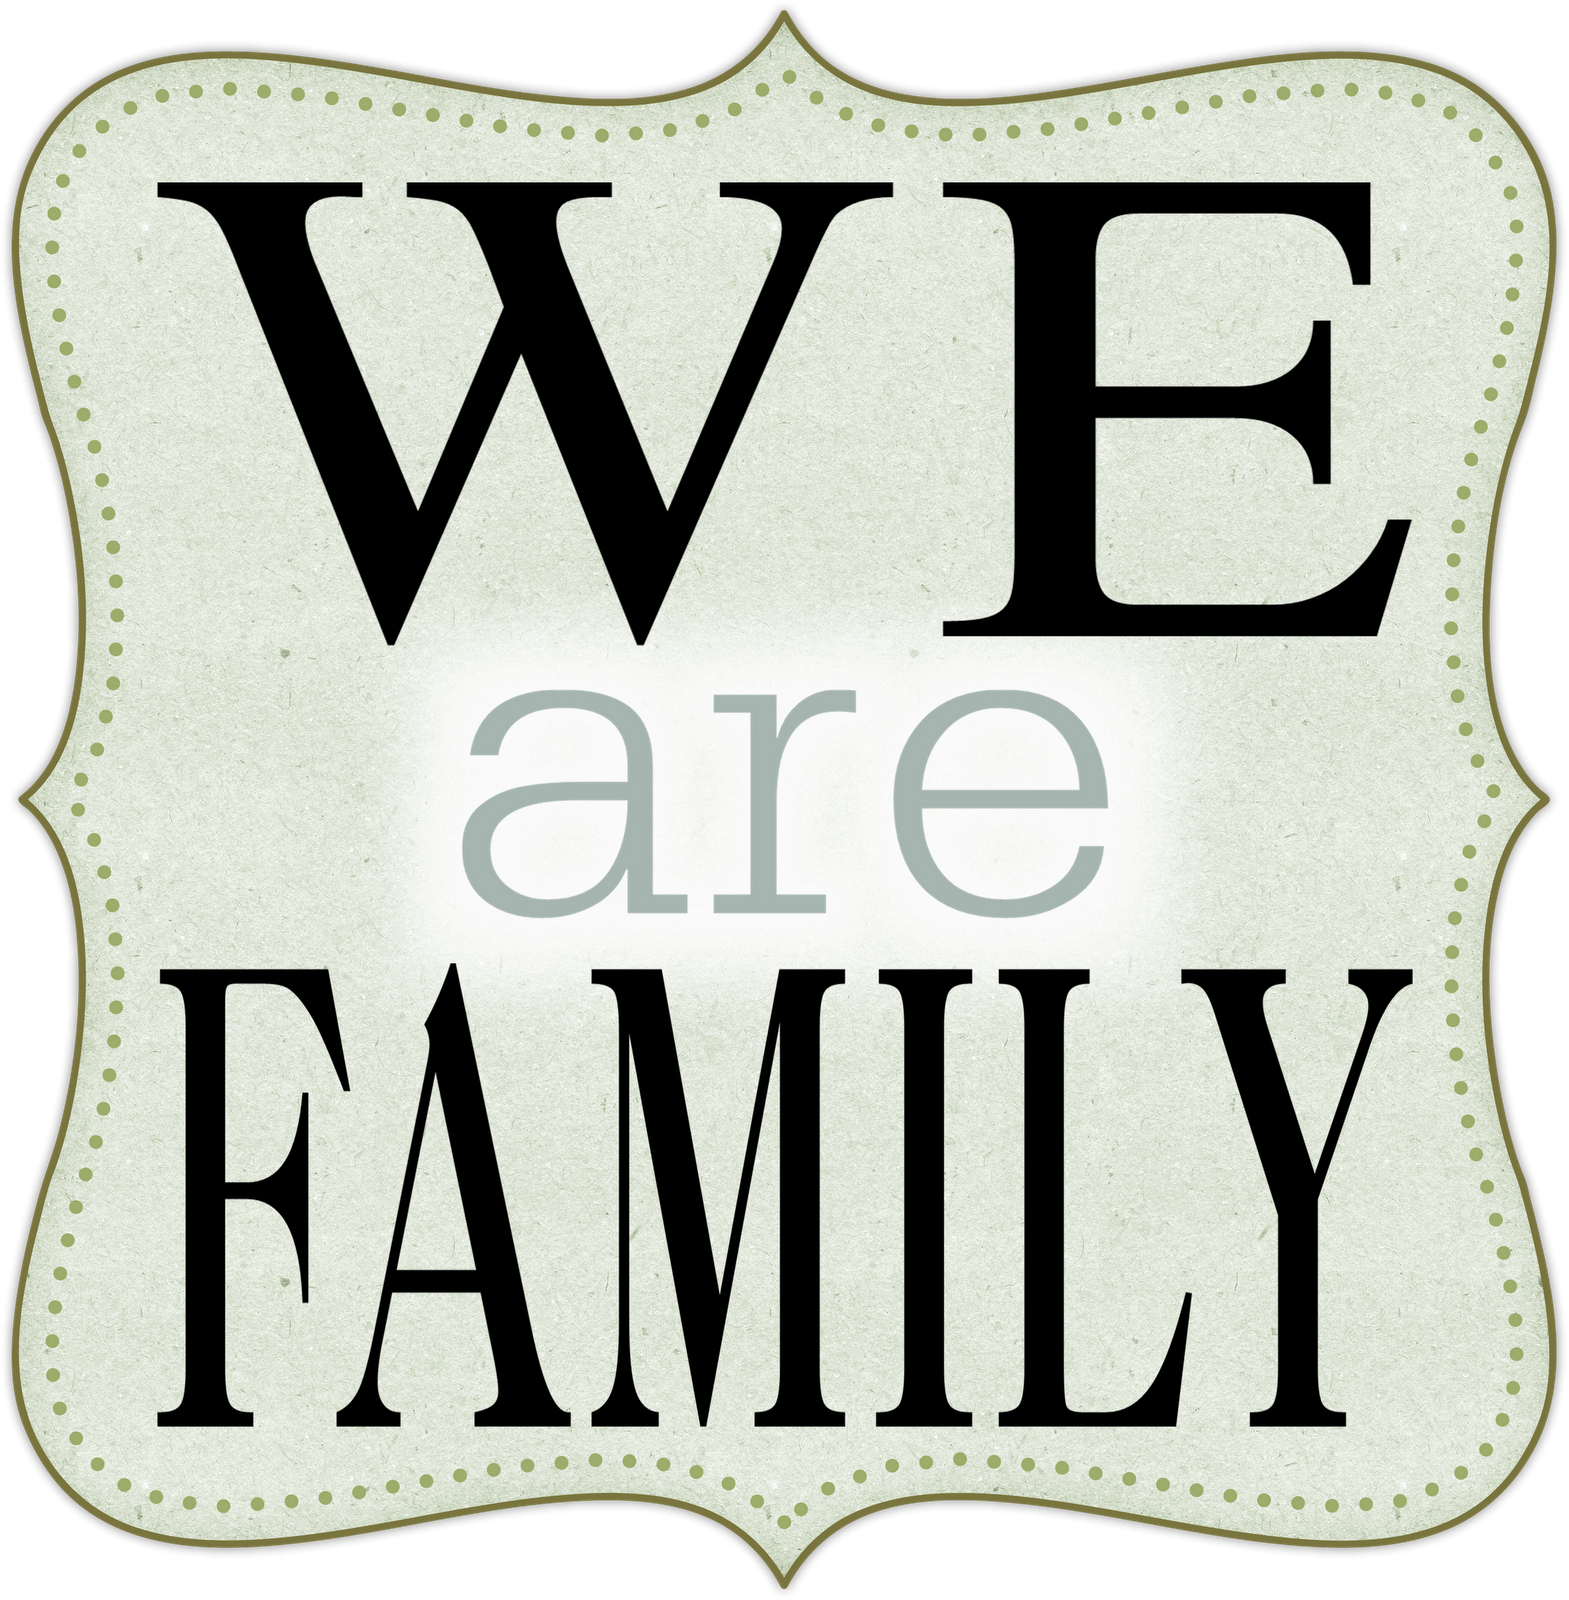 Family Clip Art Black And White - Free Clipart Images